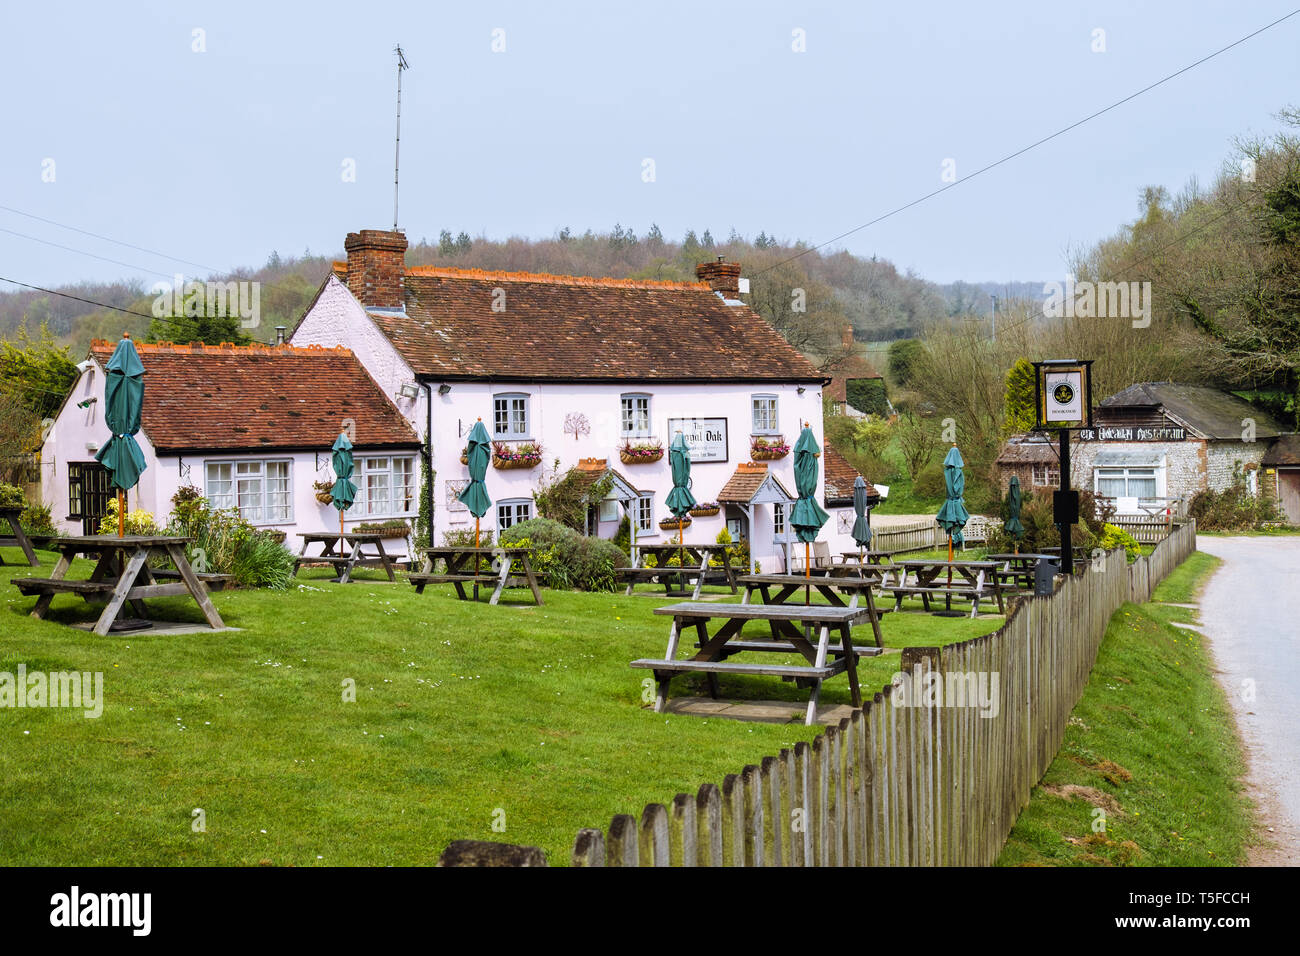 The Royal Oak 16th century haunted country pub with beer garden at Hooksway in South Downs National Park. Chilgrove, West Sussex, England, UK, Britain Stock Photo